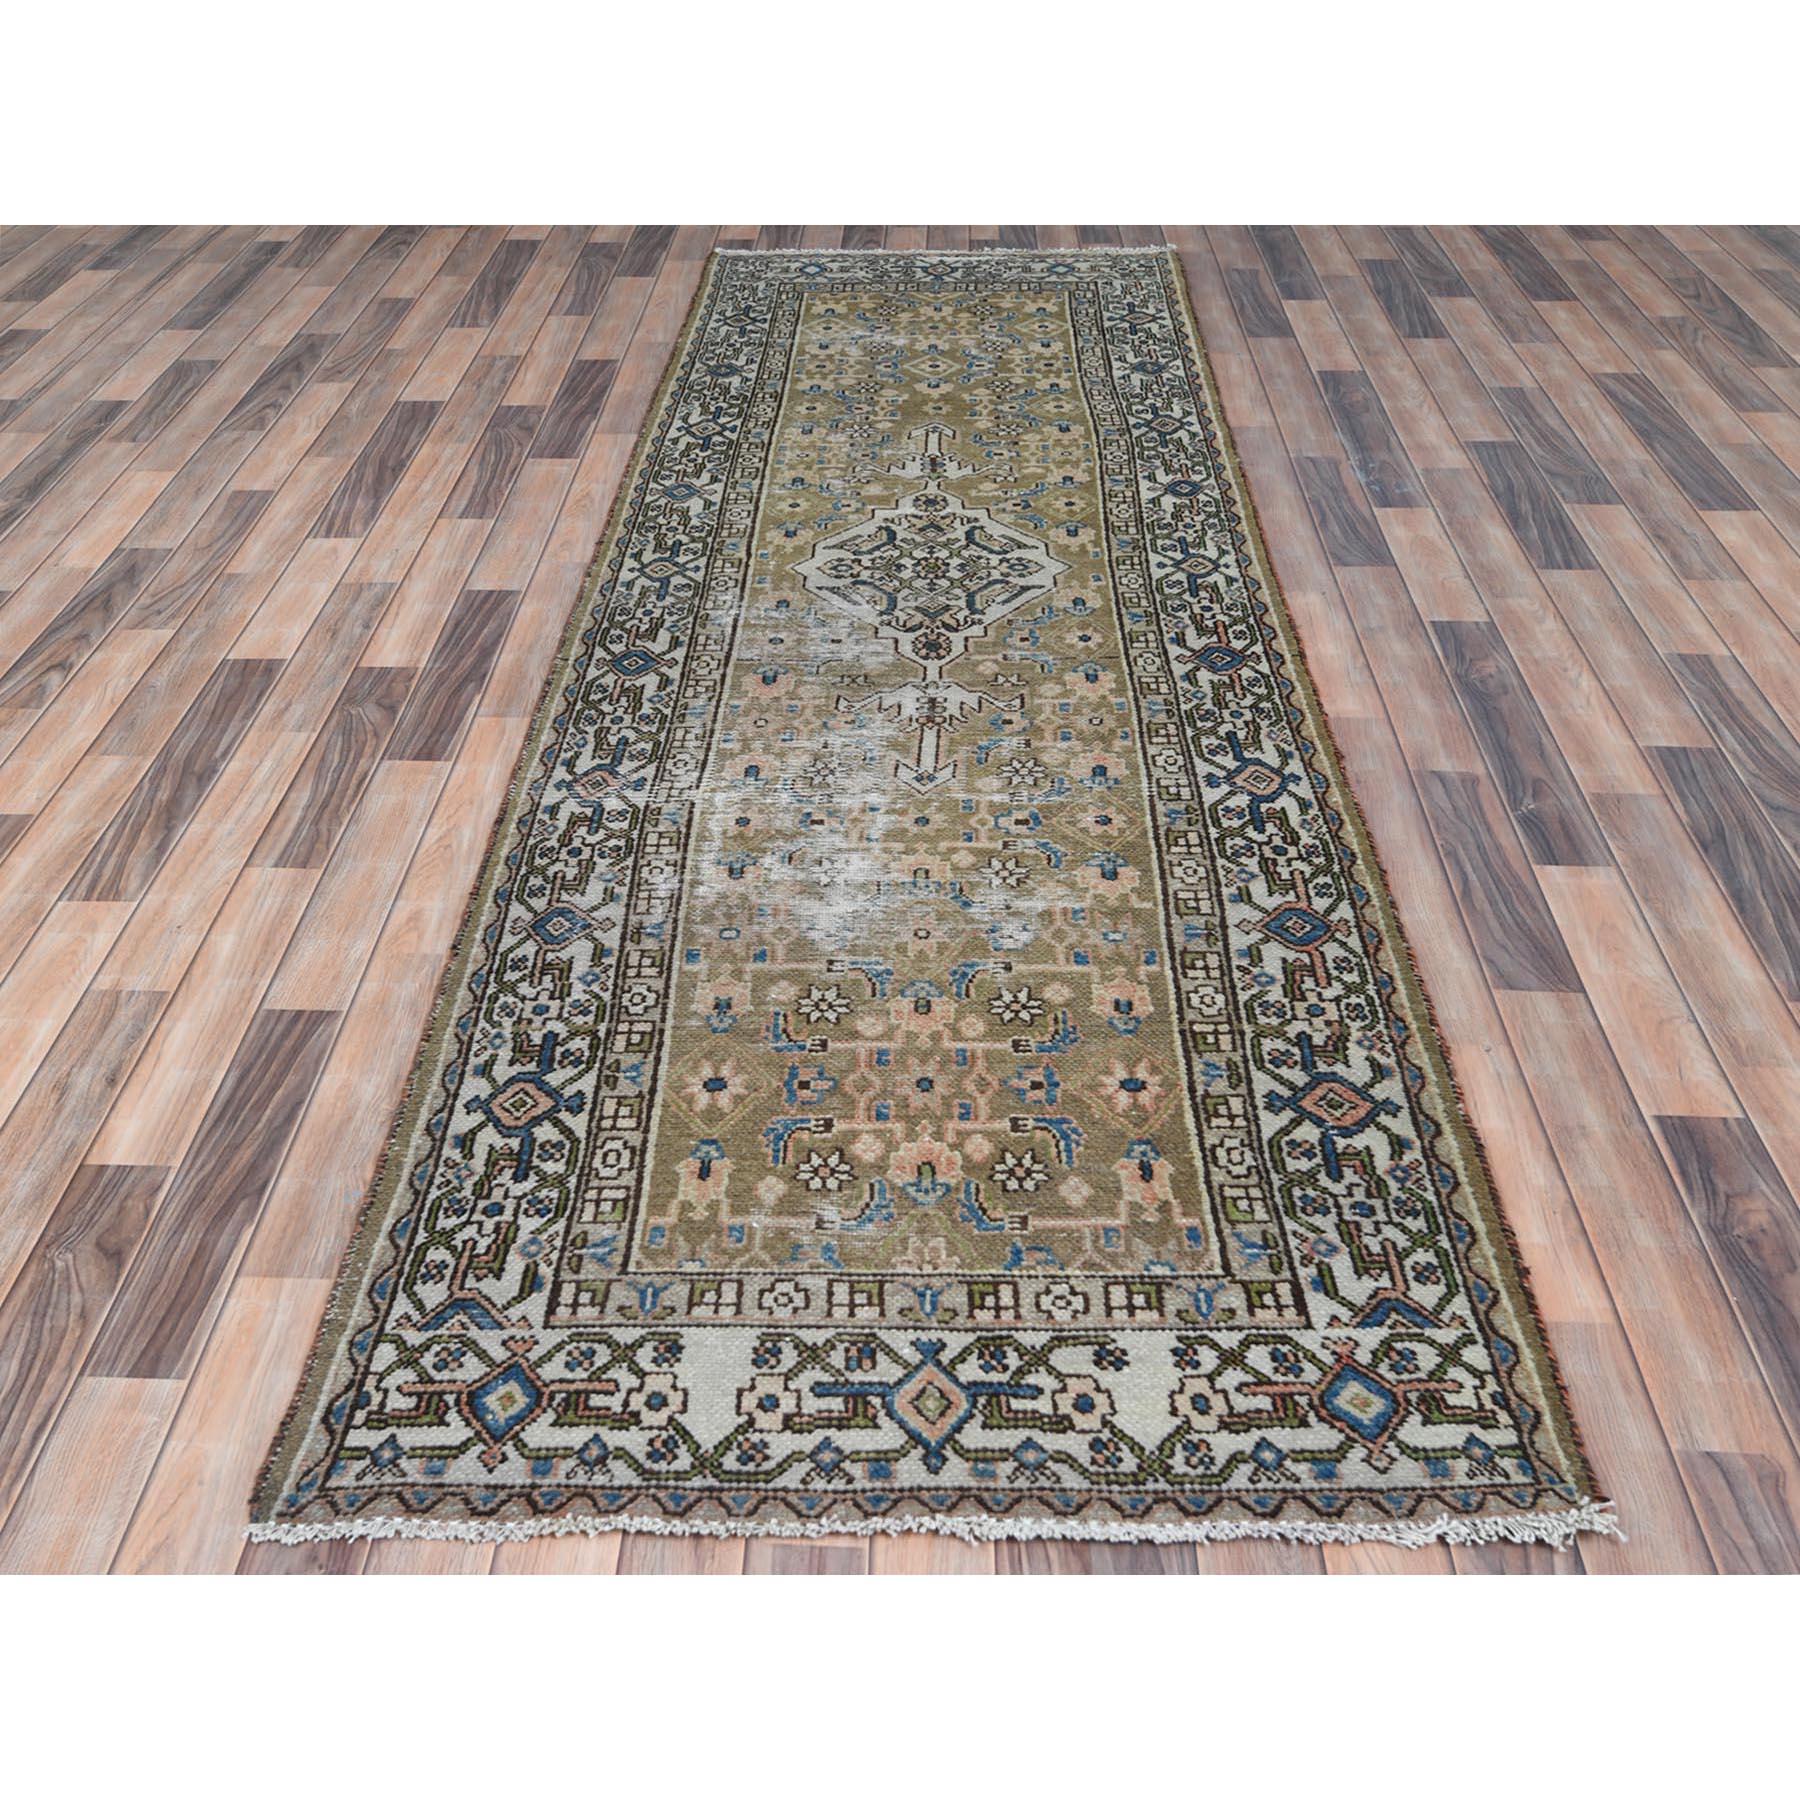 This fabulous Hand-Knotted carpet has been created and designed for extra strength and durability. This rug has been handcrafted for weeks in the traditional method that is used to make
Exact rug size in feet and inches : 3'5